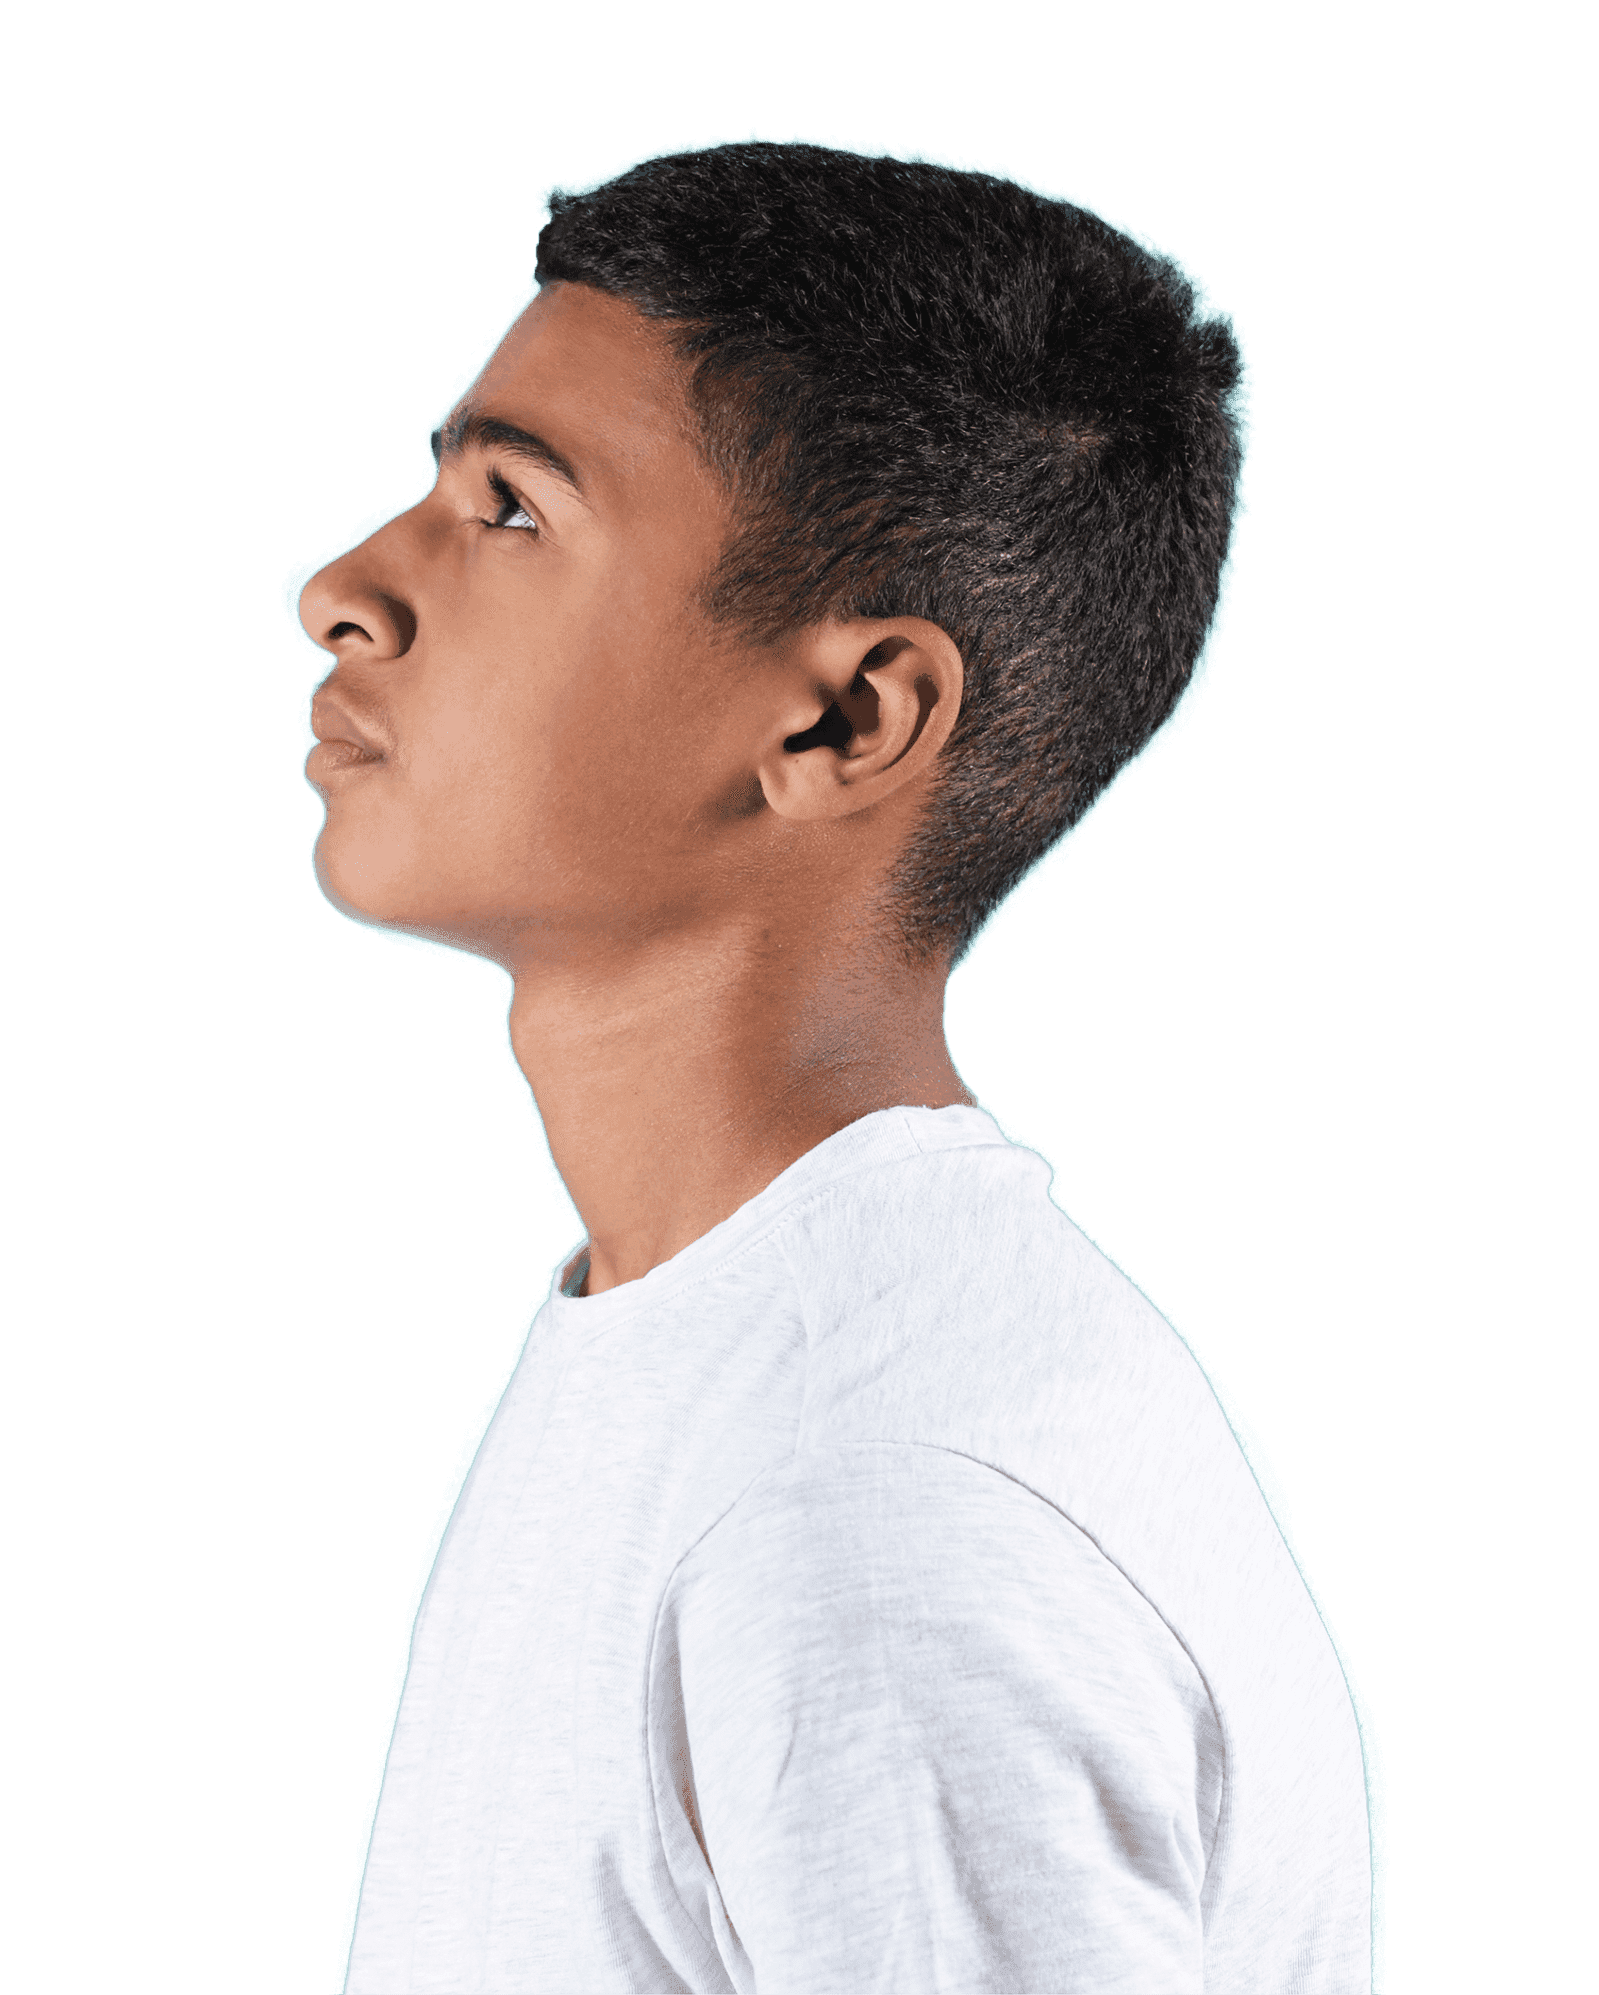 Boy in white shirt facing left and looking up